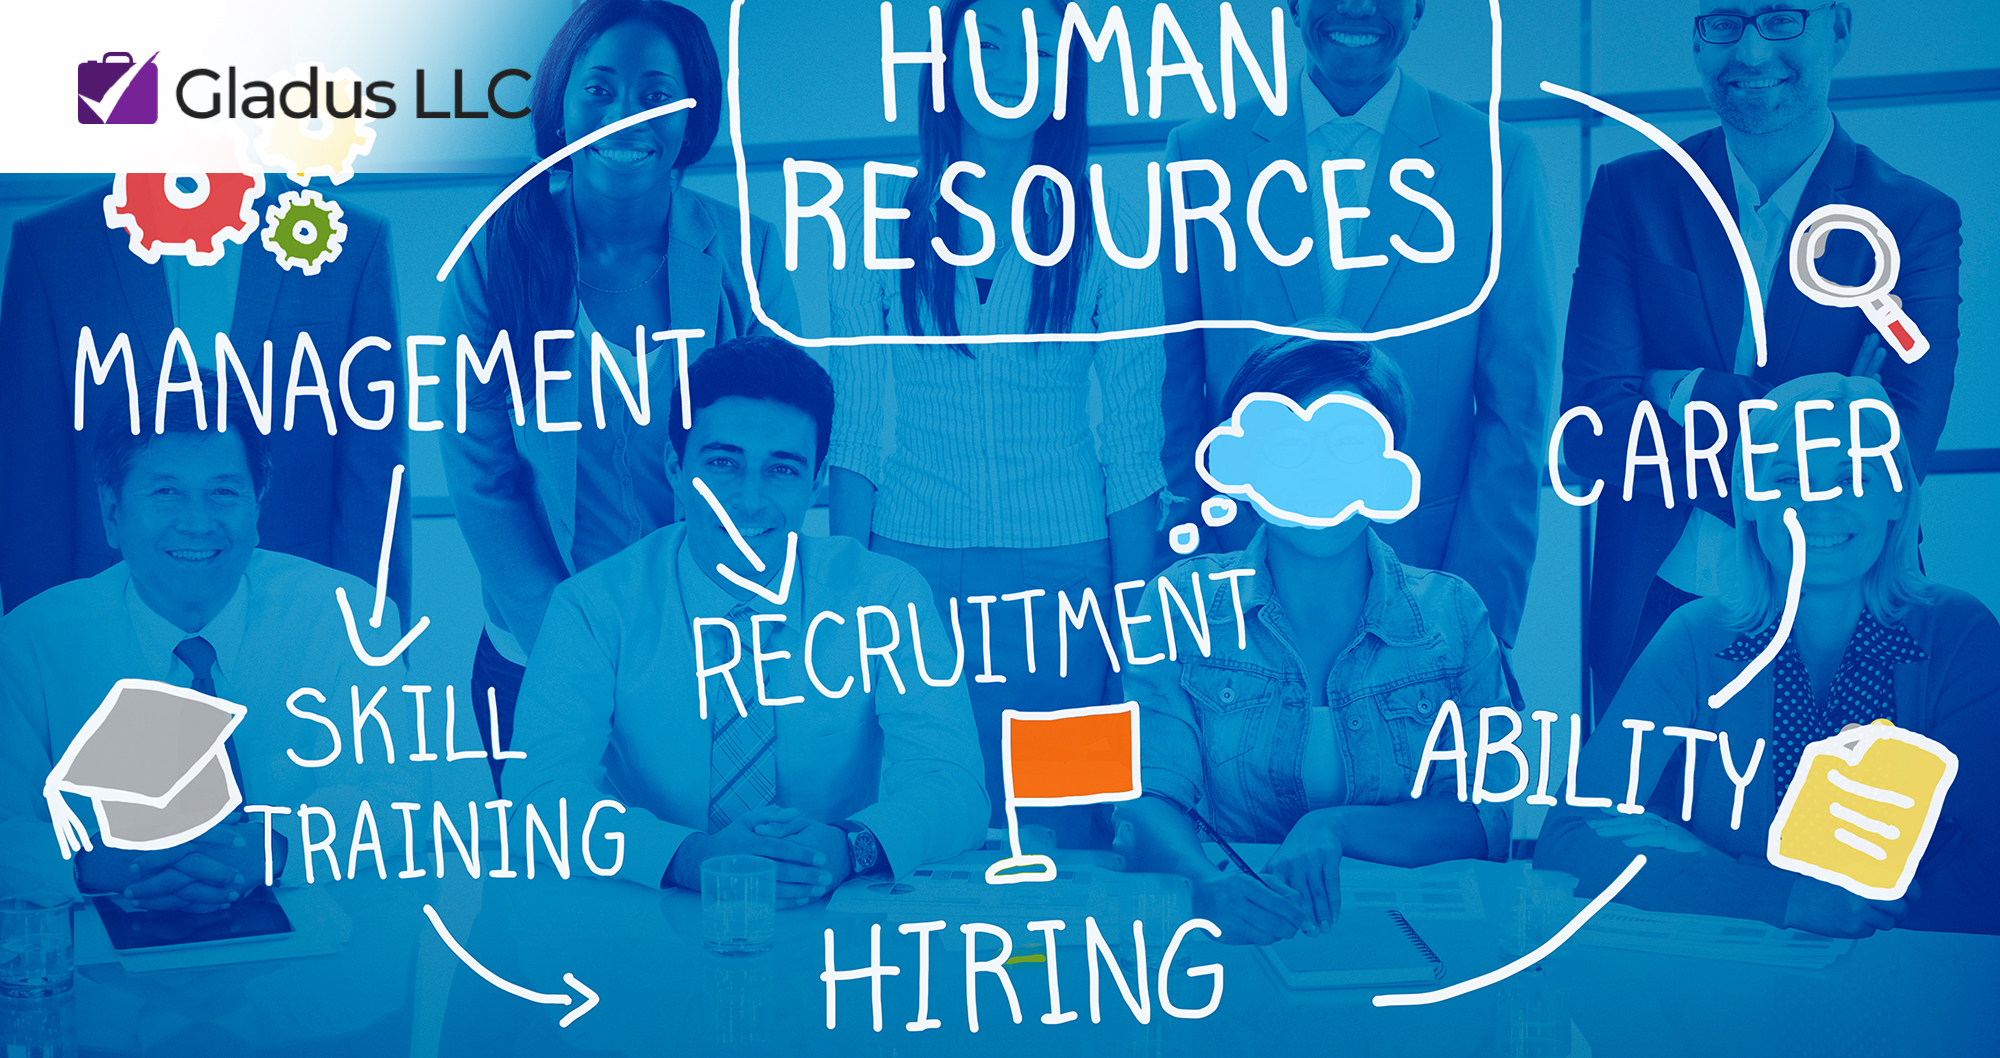 HR outsourcing from GladusLLC